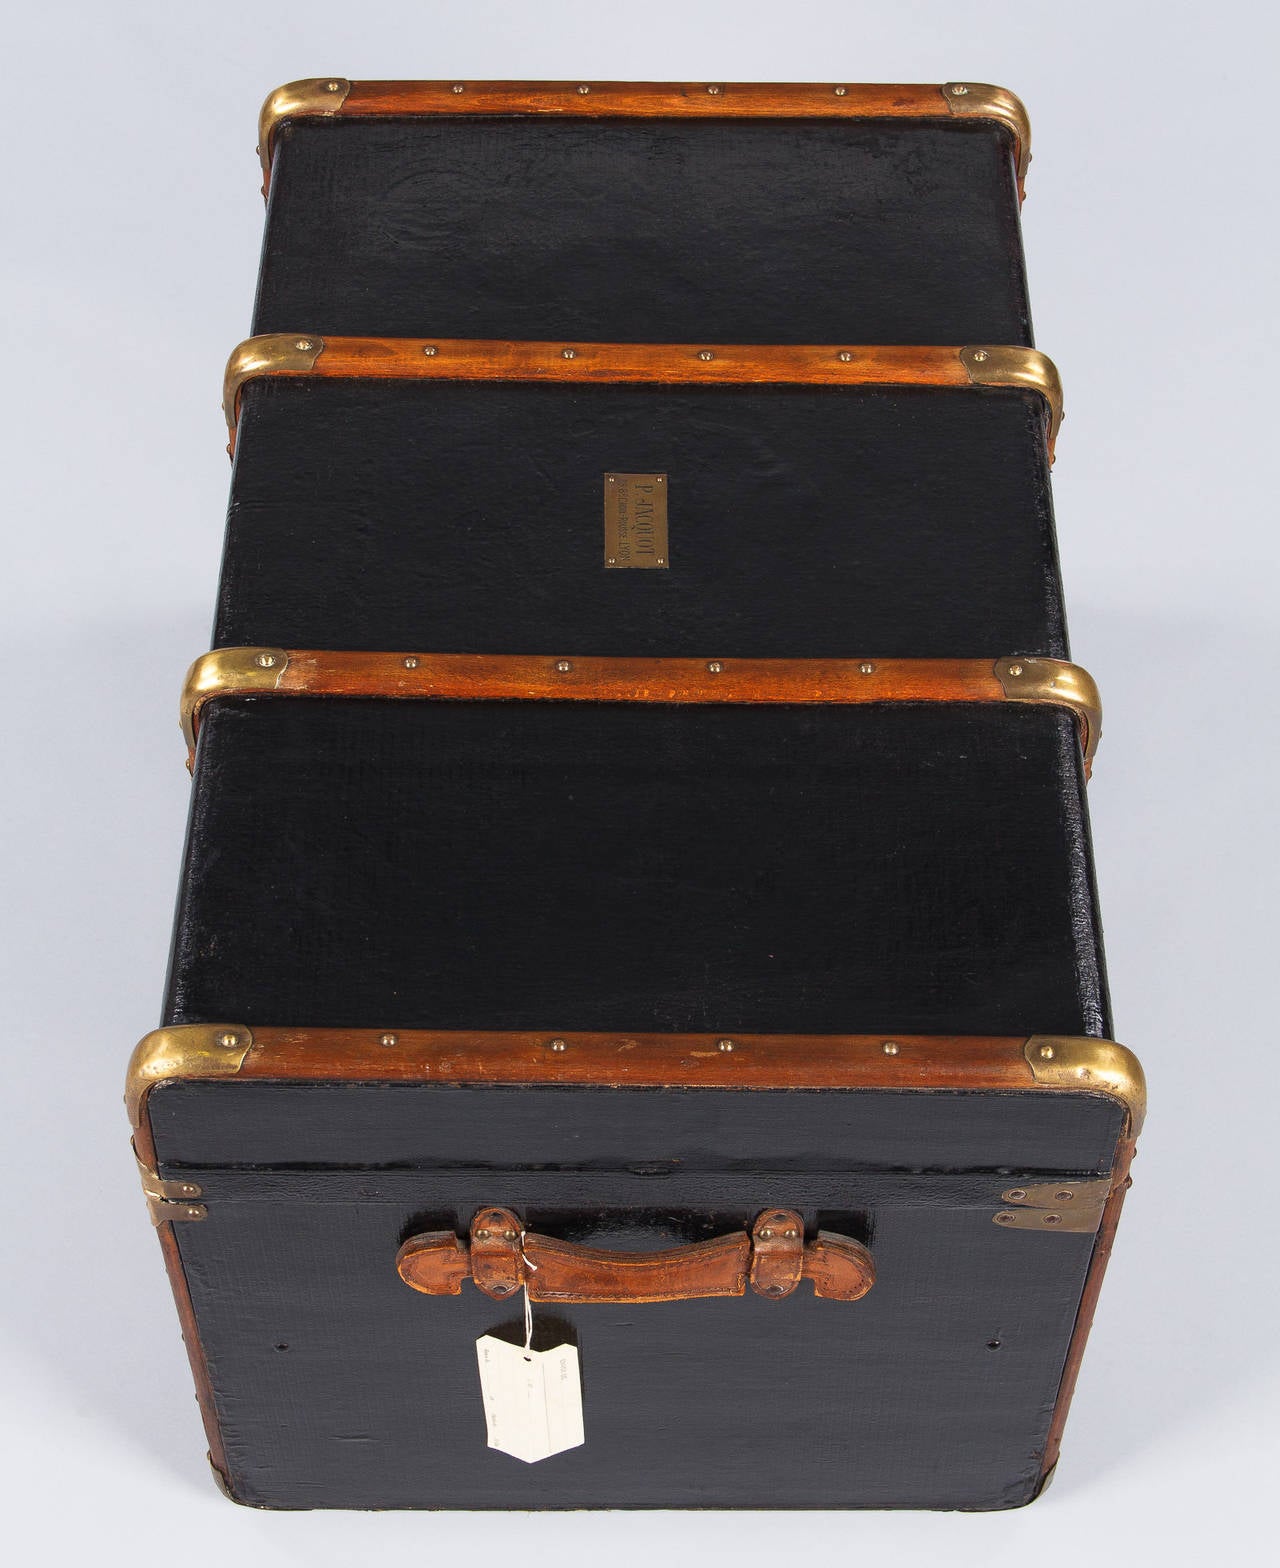 1900s French Black Traveling Trunk 4